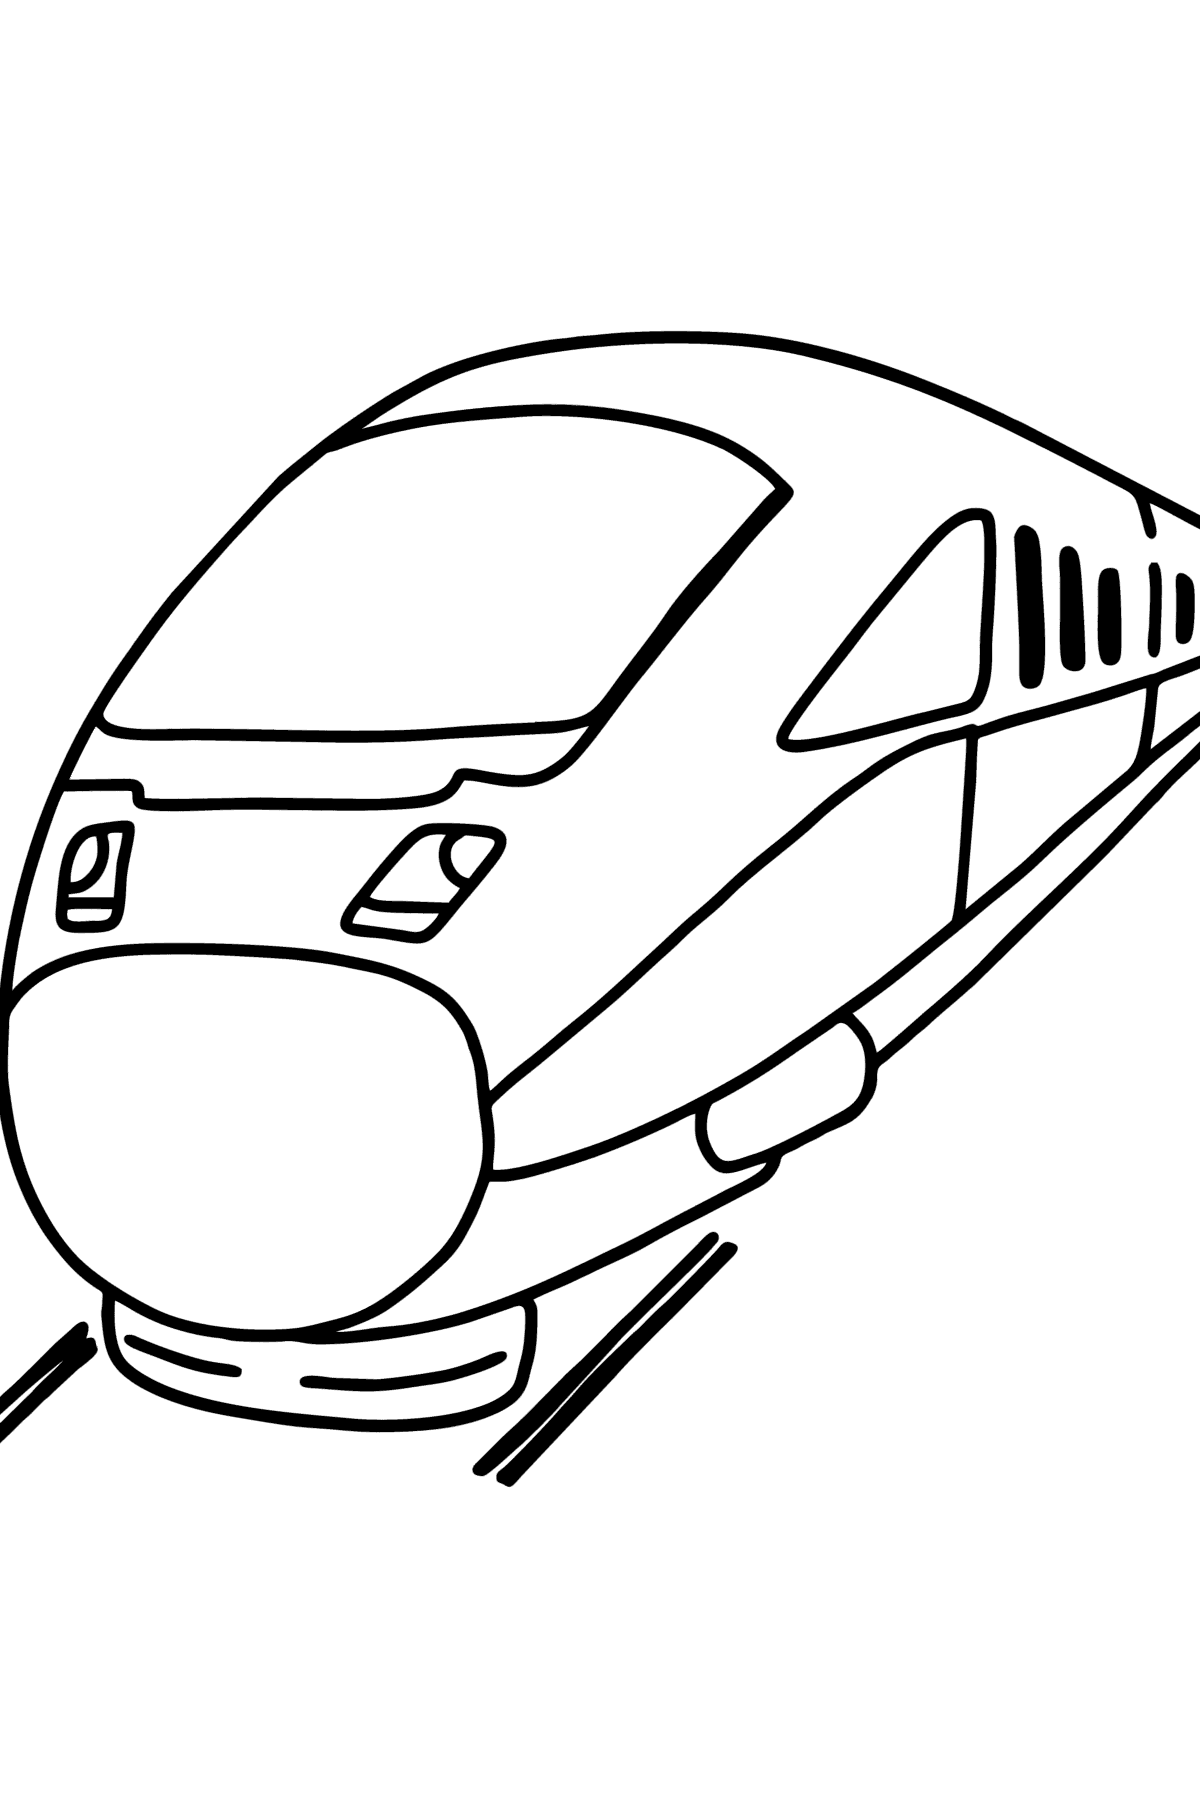 Train coloring page - Coloring Pages for Kids